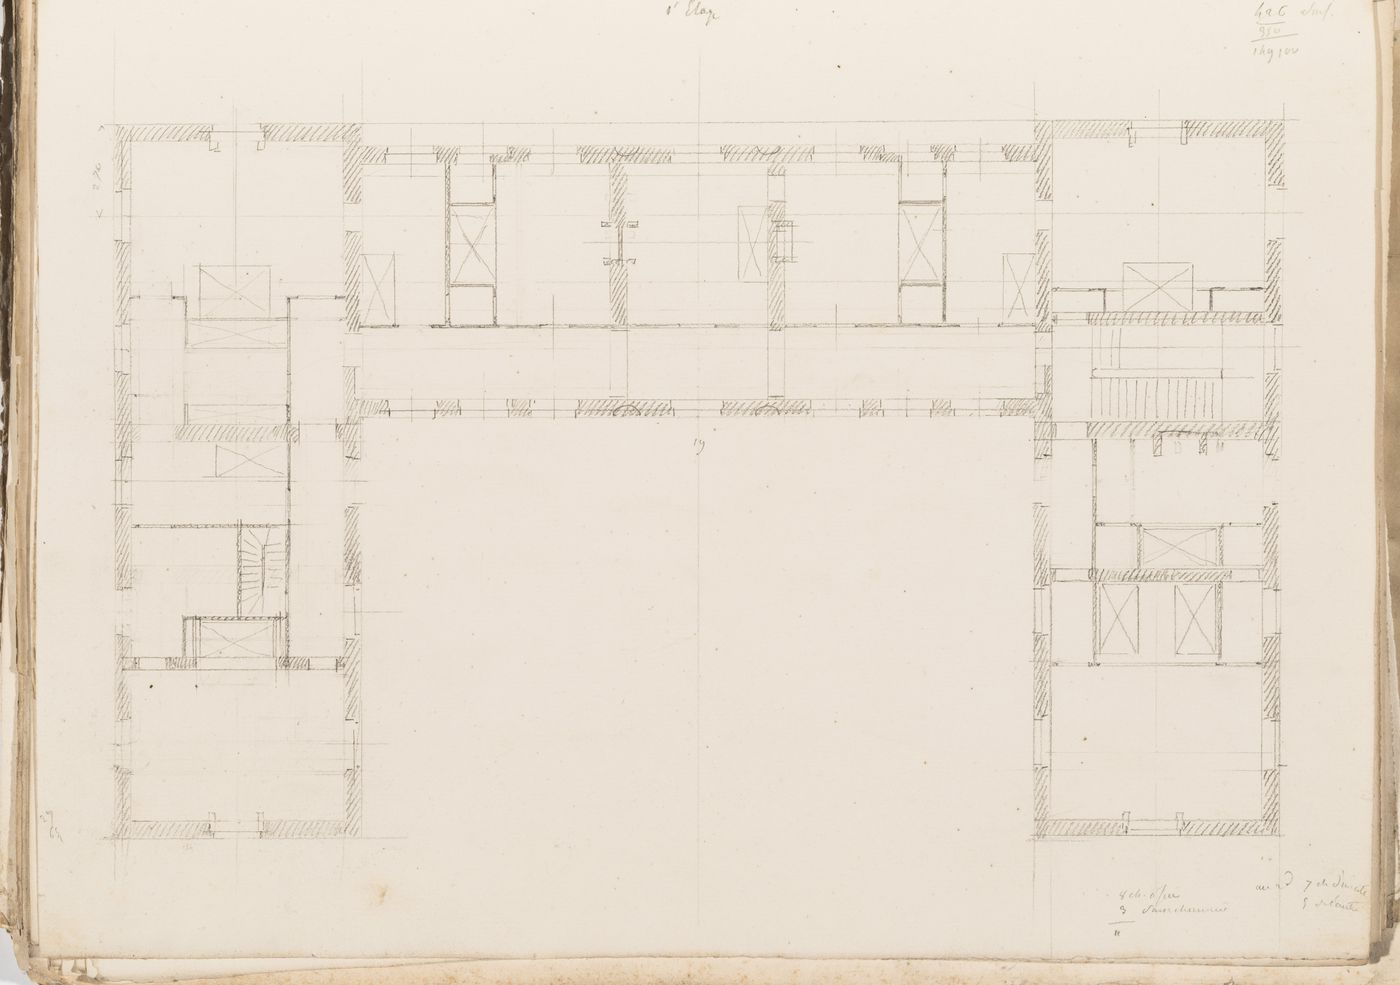 Project no. 3 for a country house for comte Treilhard: First floor plan